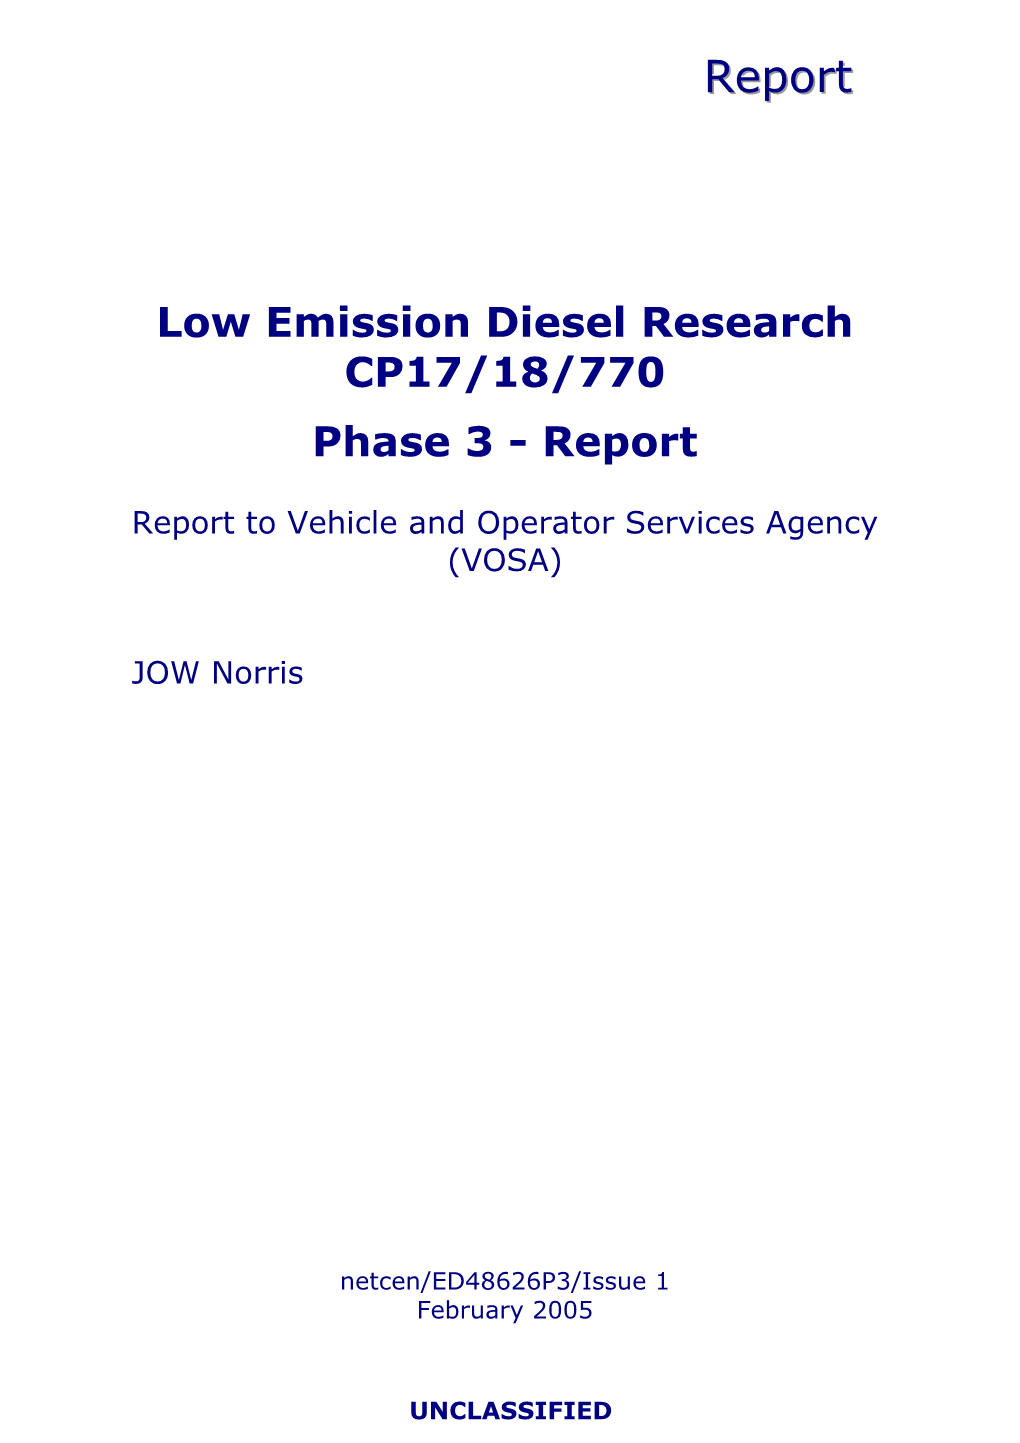 Low Emission Diesel Research CP17/18/770